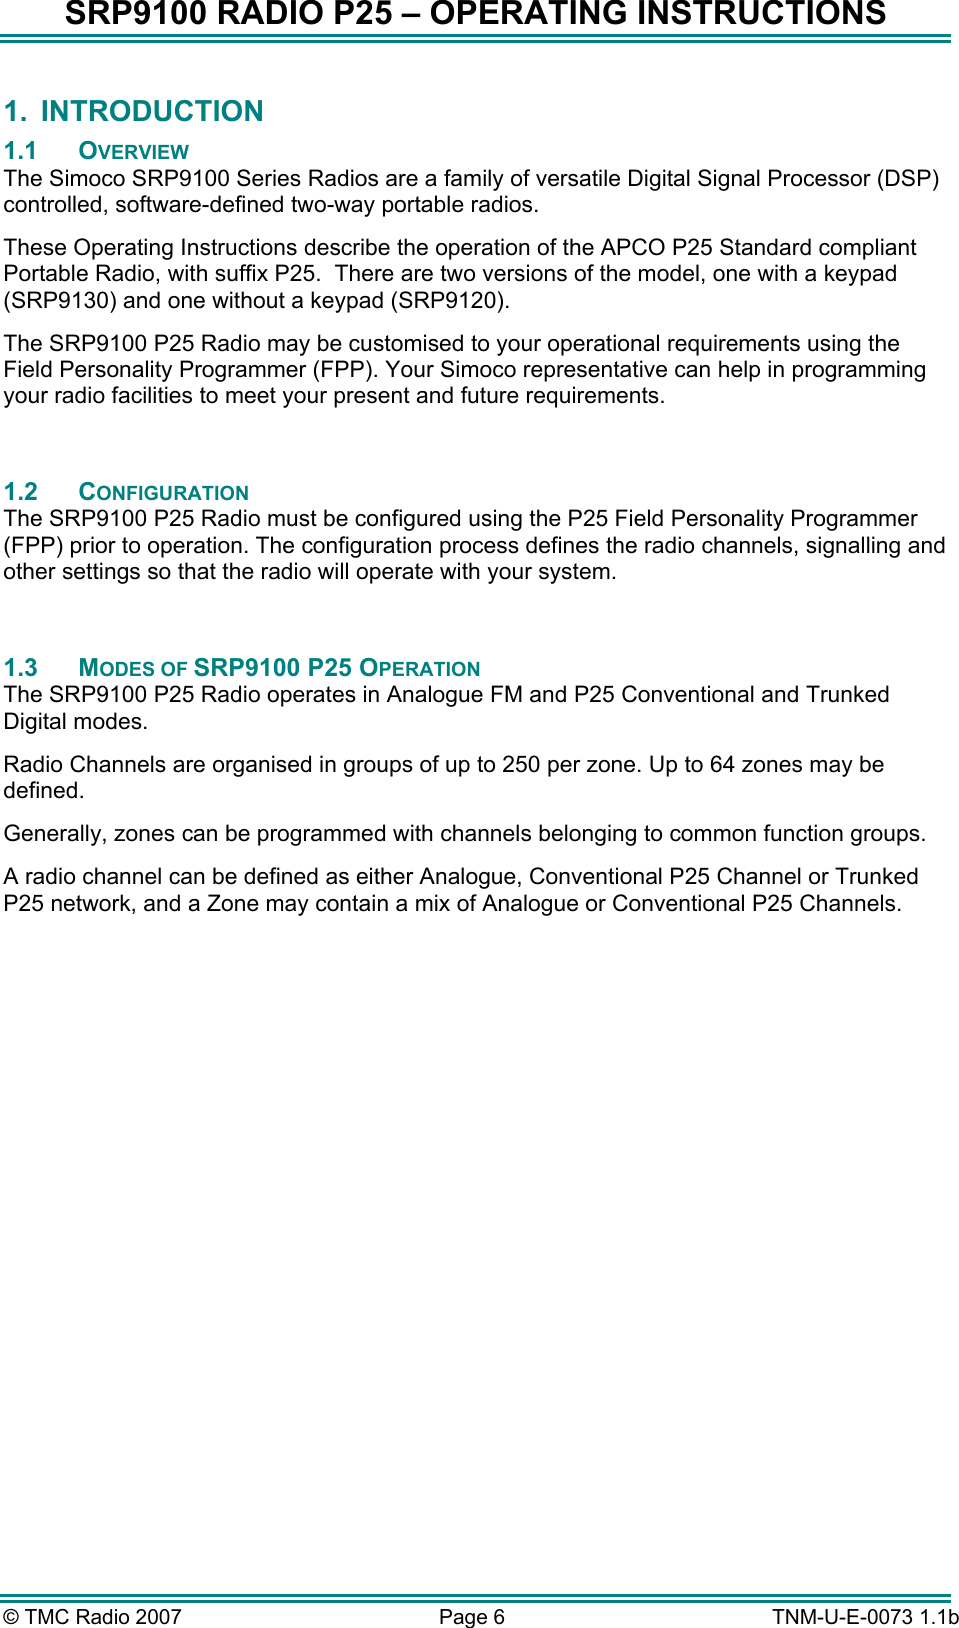 SRP9100 RADIO P25 – OPERATING INSTRUCTIONS 1. INTRODUCTION 1.1 OVERVIEW The Simoco SRP9100 Series Radios are a family of versatile Digital Signal Processor (DSP) controlled, software-defined two-way portable radios.  These Operating Instructions describe the operation of the APCO P25 Standard compliant Portable Radio, with suffix P25.  There are two versions of the model, one with a keypad (SRP9130) and one without a keypad (SRP9120). The SRP9100 P25 Radio may be customised to your operational requirements using the Field Personality Programmer (FPP). Your Simoco representative can help in programming your radio facilities to meet your present and future requirements.  1.2 CONFIGURATION The SRP9100 P25 Radio must be configured using the P25 Field Personality Programmer (FPP) prior to operation. The configuration process defines the radio channels, signalling and other settings so that the radio will operate with your system.  1.3 MODES OF SRP9100 P25 OPERATION The SRP9100 P25 Radio operates in Analogue FM and P25 Conventional and Trunked Digital modes. Radio Channels are organised in groups of up to 250 per zone. Up to 64 zones may be defined. Generally, zones can be programmed with channels belonging to common function groups. A radio channel can be defined as either Analogue, Conventional P25 Channel or Trunked P25 network, and a Zone may contain a mix of Analogue or Conventional P25 Channels.        © TMC Radio 2007  Page 6   TNM-U-E-0073 1.1b 